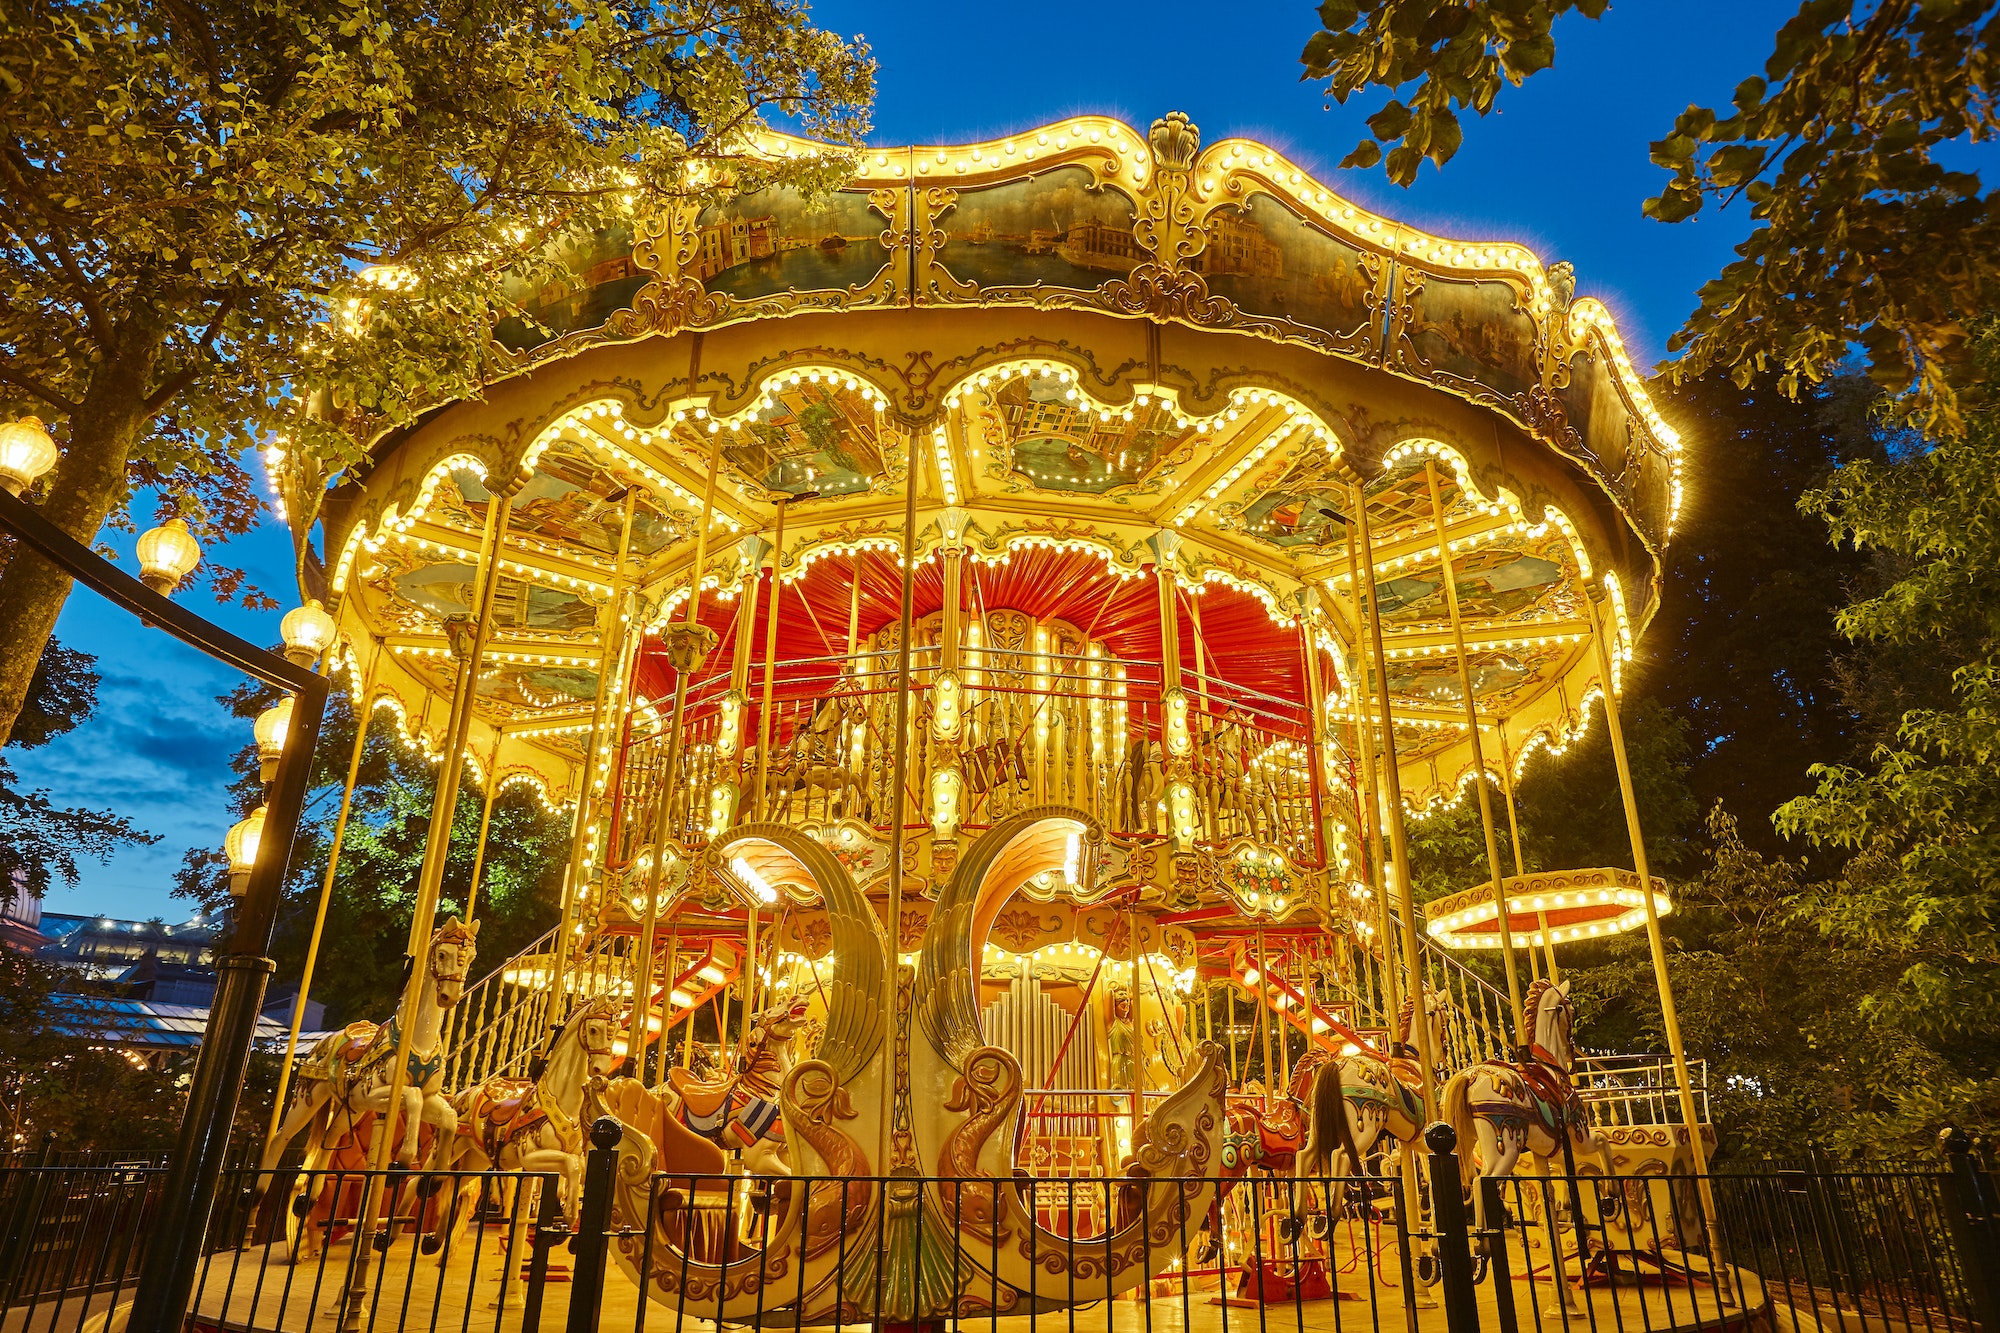 Merry go round carousel childhood entertainment. Vintage playground attraction. Adorable